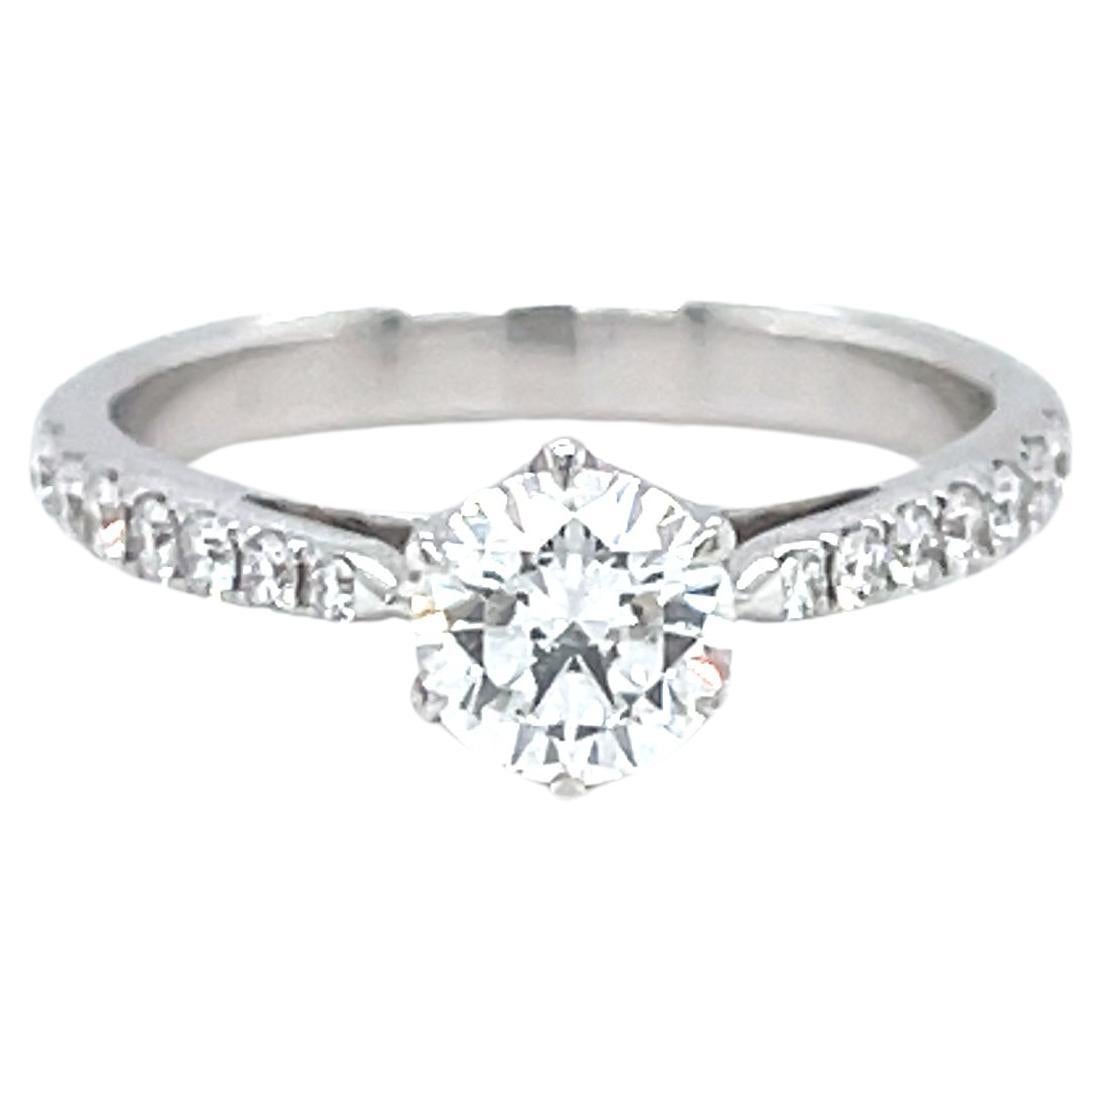 GIA Certified Round 0.72 Carat E VVS2 Diamond Solitaire Ring in 18K White Gold